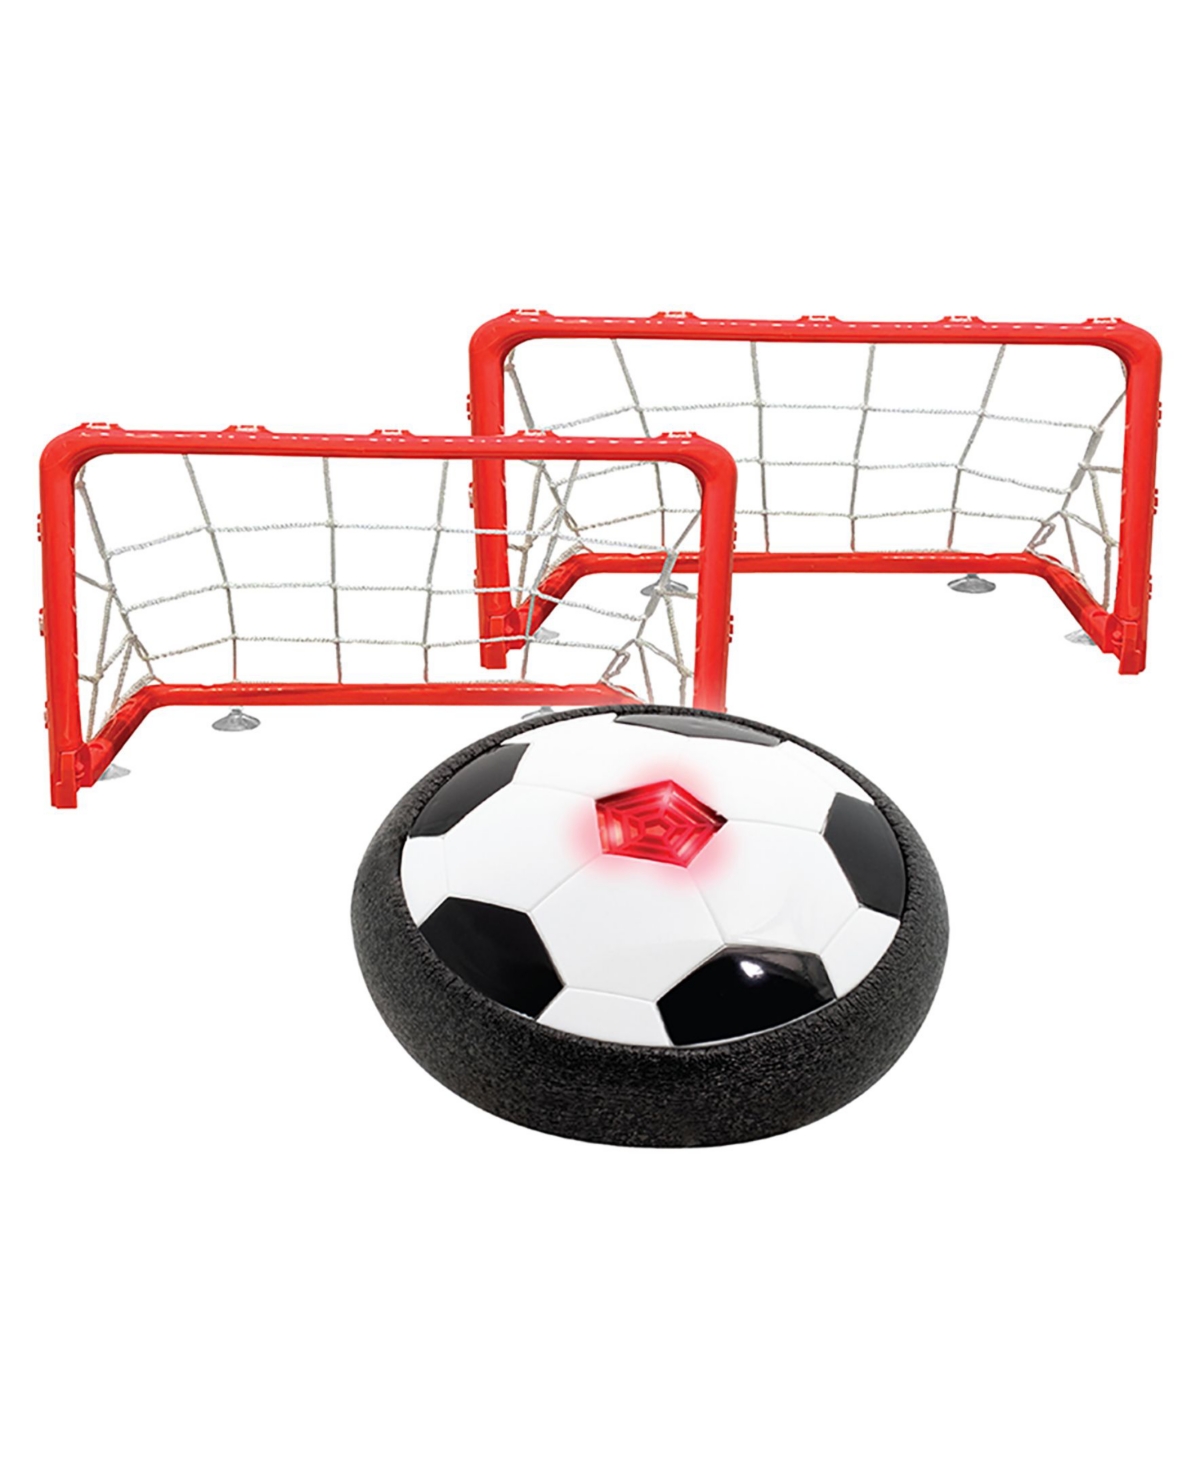 Shop Maccabi Art Air Soccer Hover Ball Disk With 2 Goal Post Nets Game In Multi